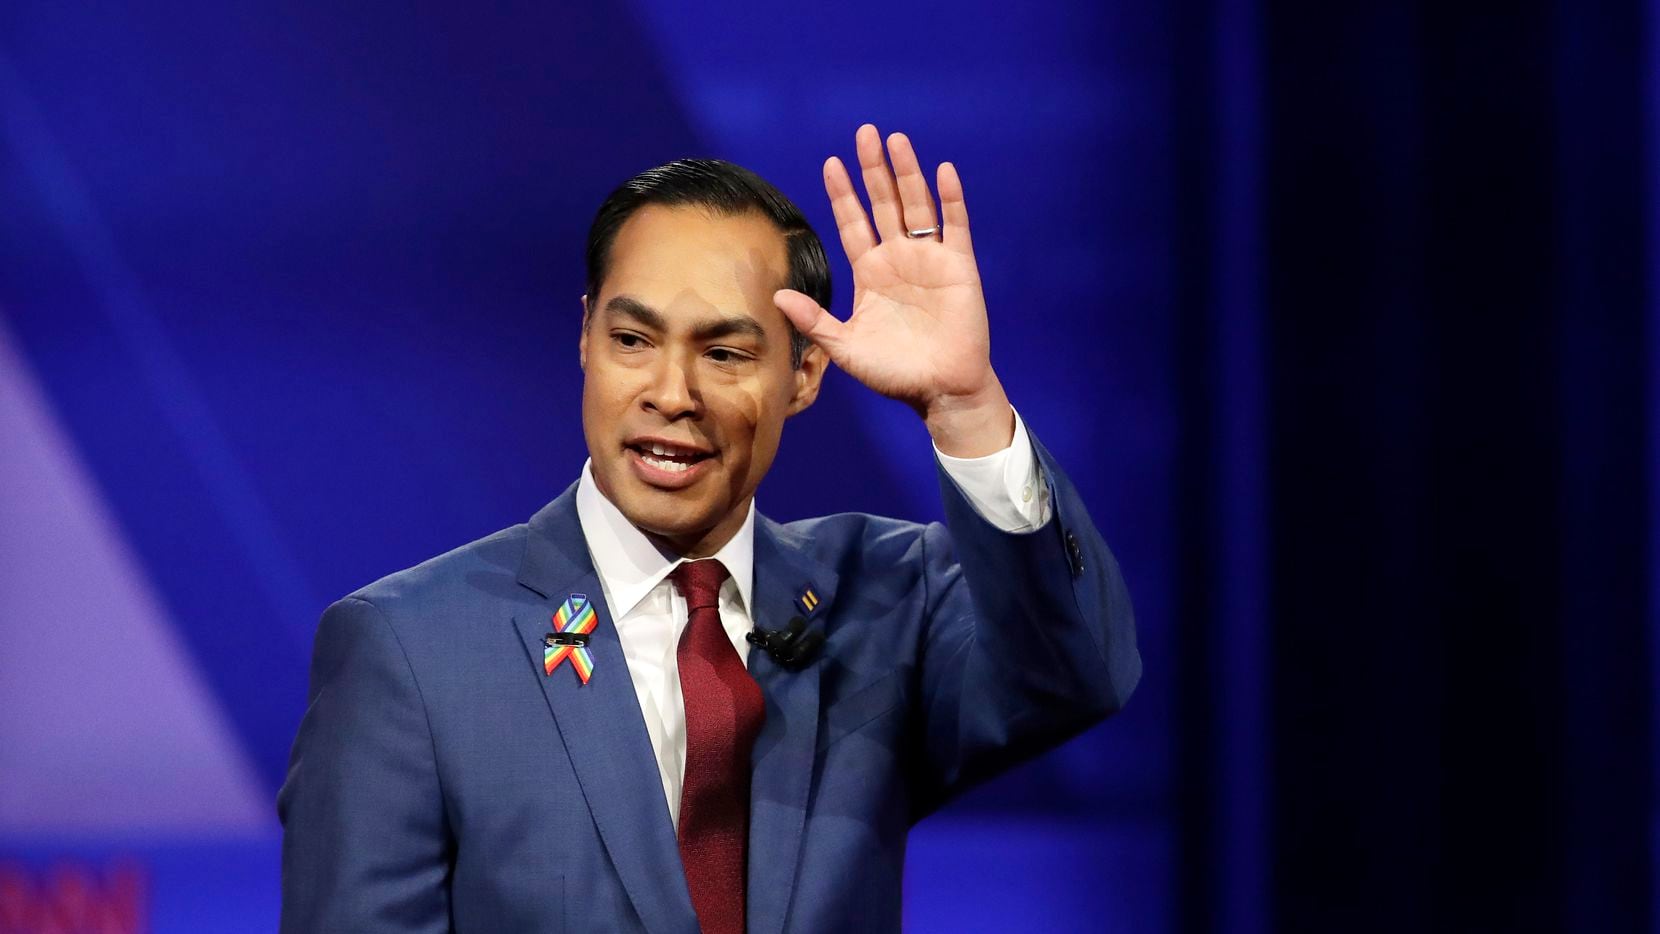 Former Housing and Urban Development Secretary and Democratic presidential candidate Julian Castro waves as he takes the stage during the Power of our Pride Town Hall Thursday, Oct. 10, 2019, in Los Angeles. The LGBTQ-focused town hall featured nine 2020 Democratic presidential candidates. (AP Photo/Marcio Jose Sanchez)